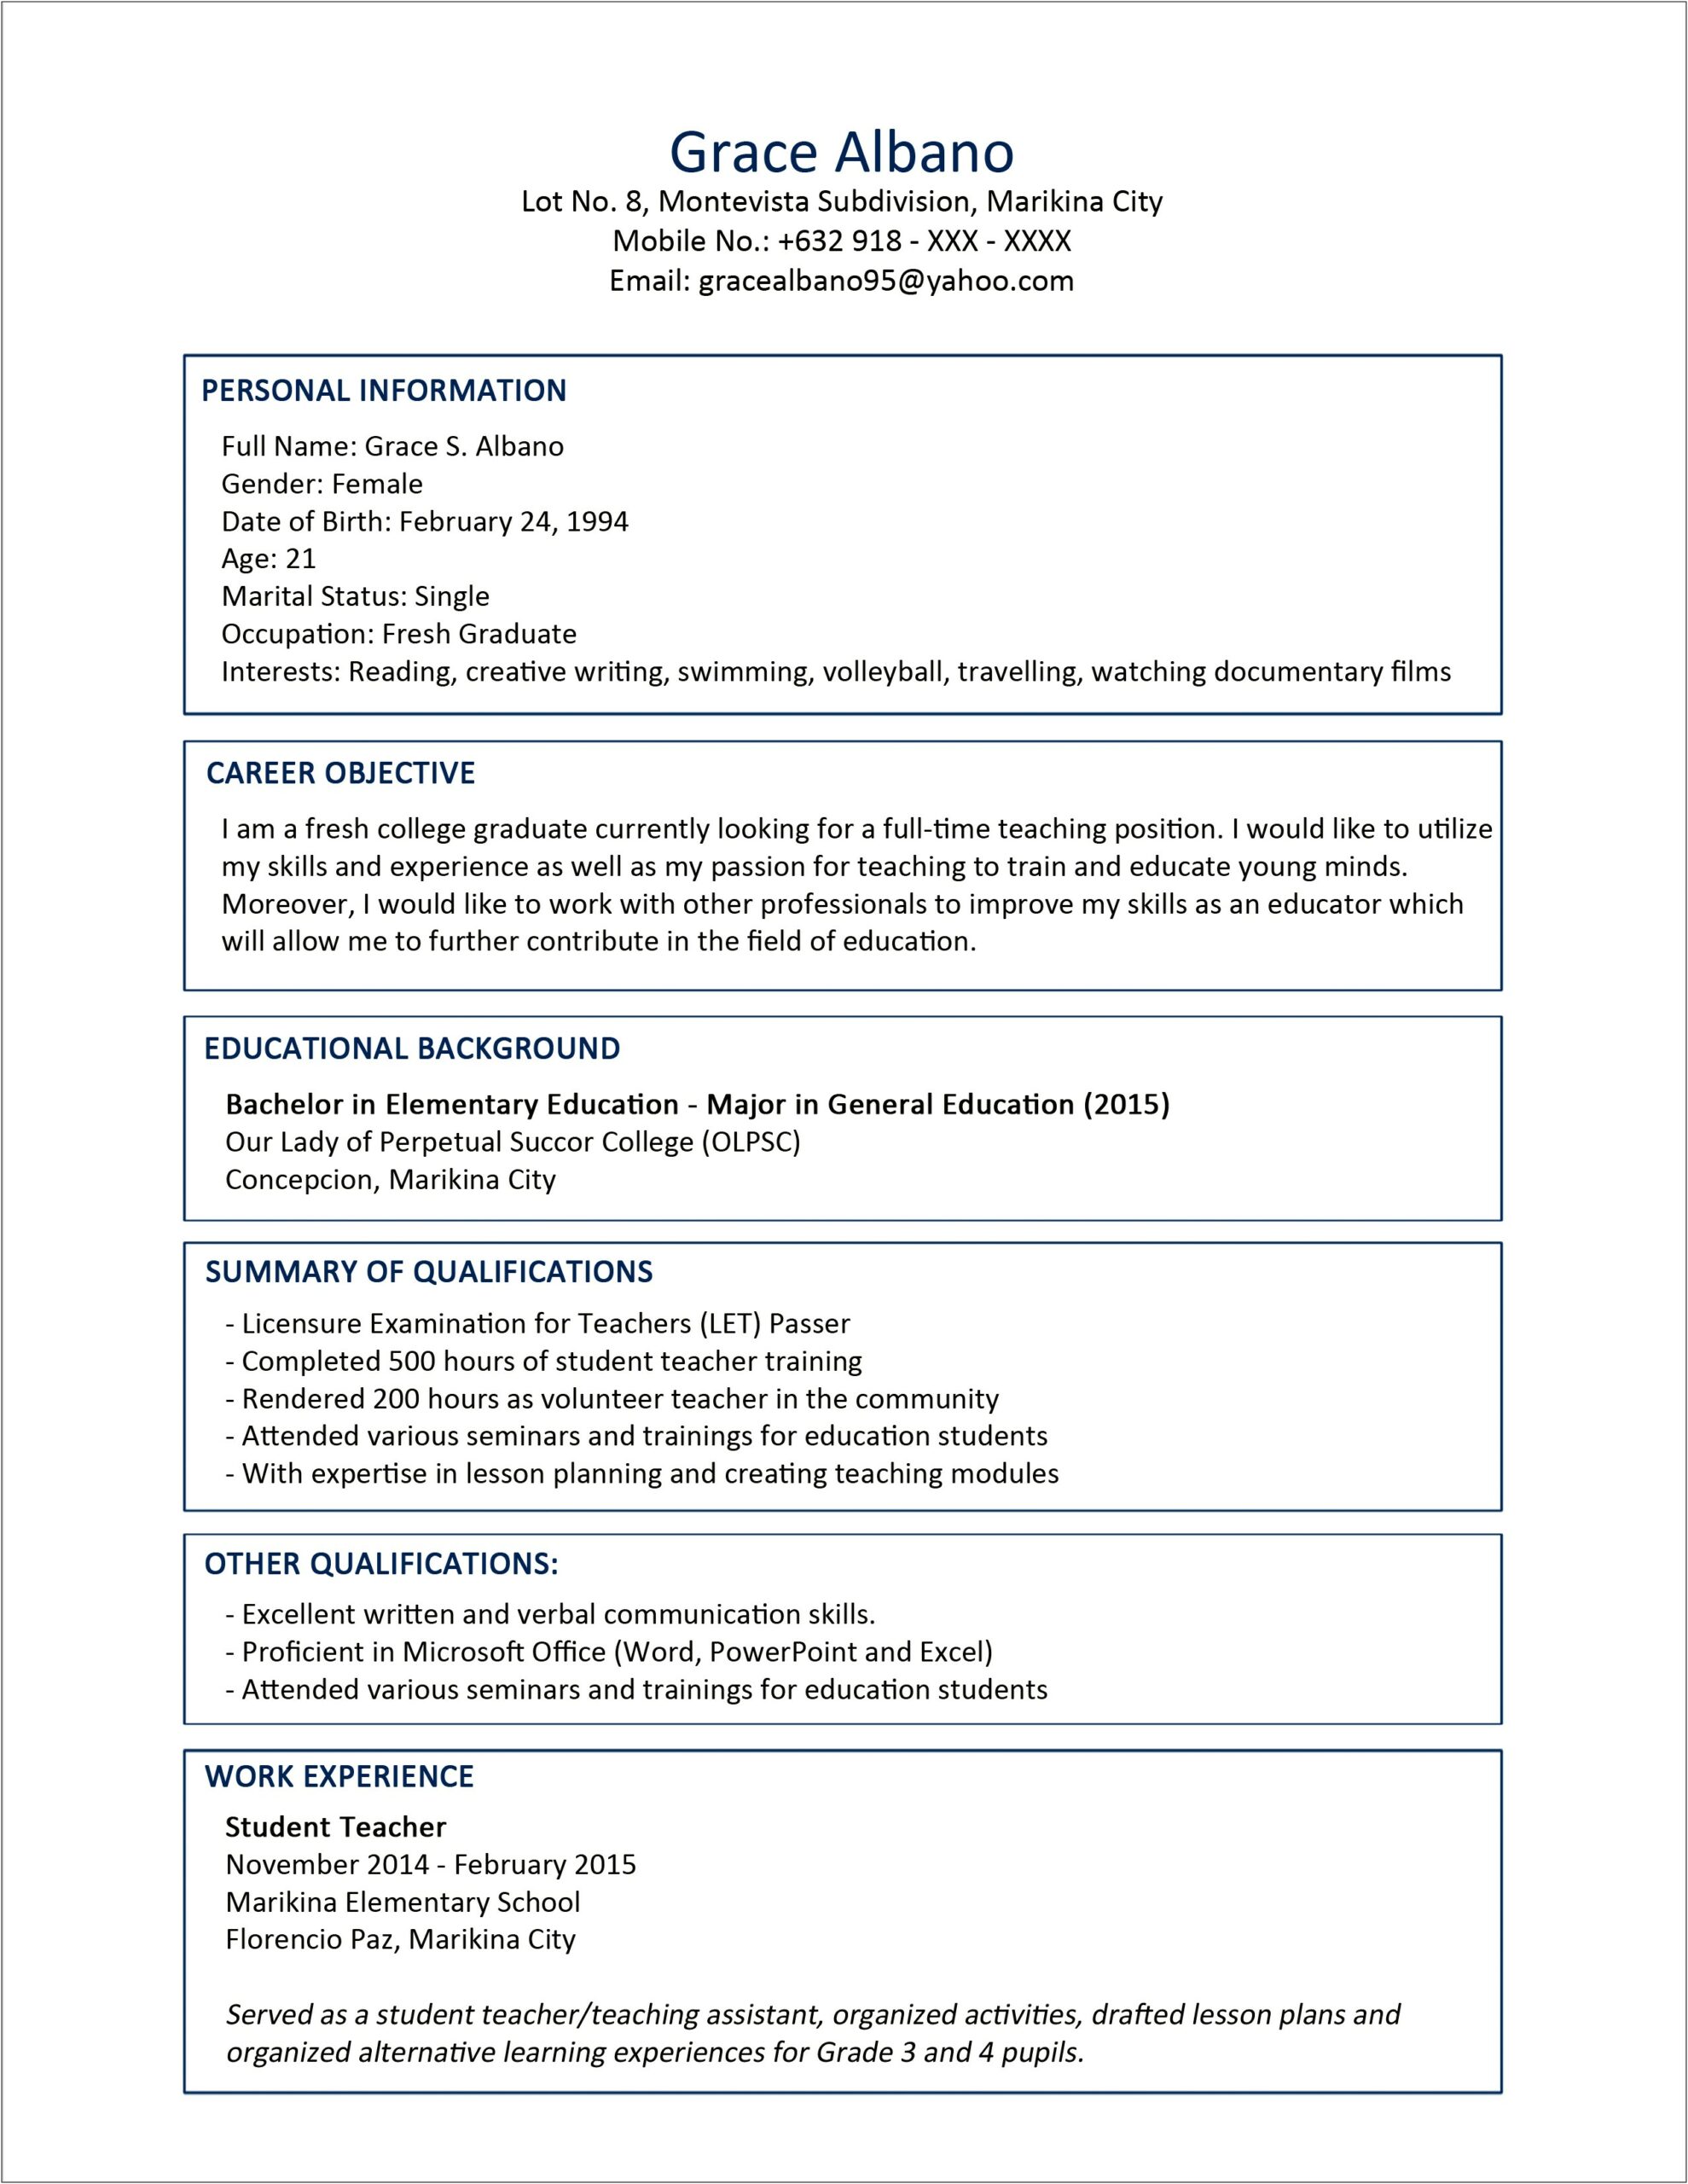 Sample Resume Cover Letter And Reference Page